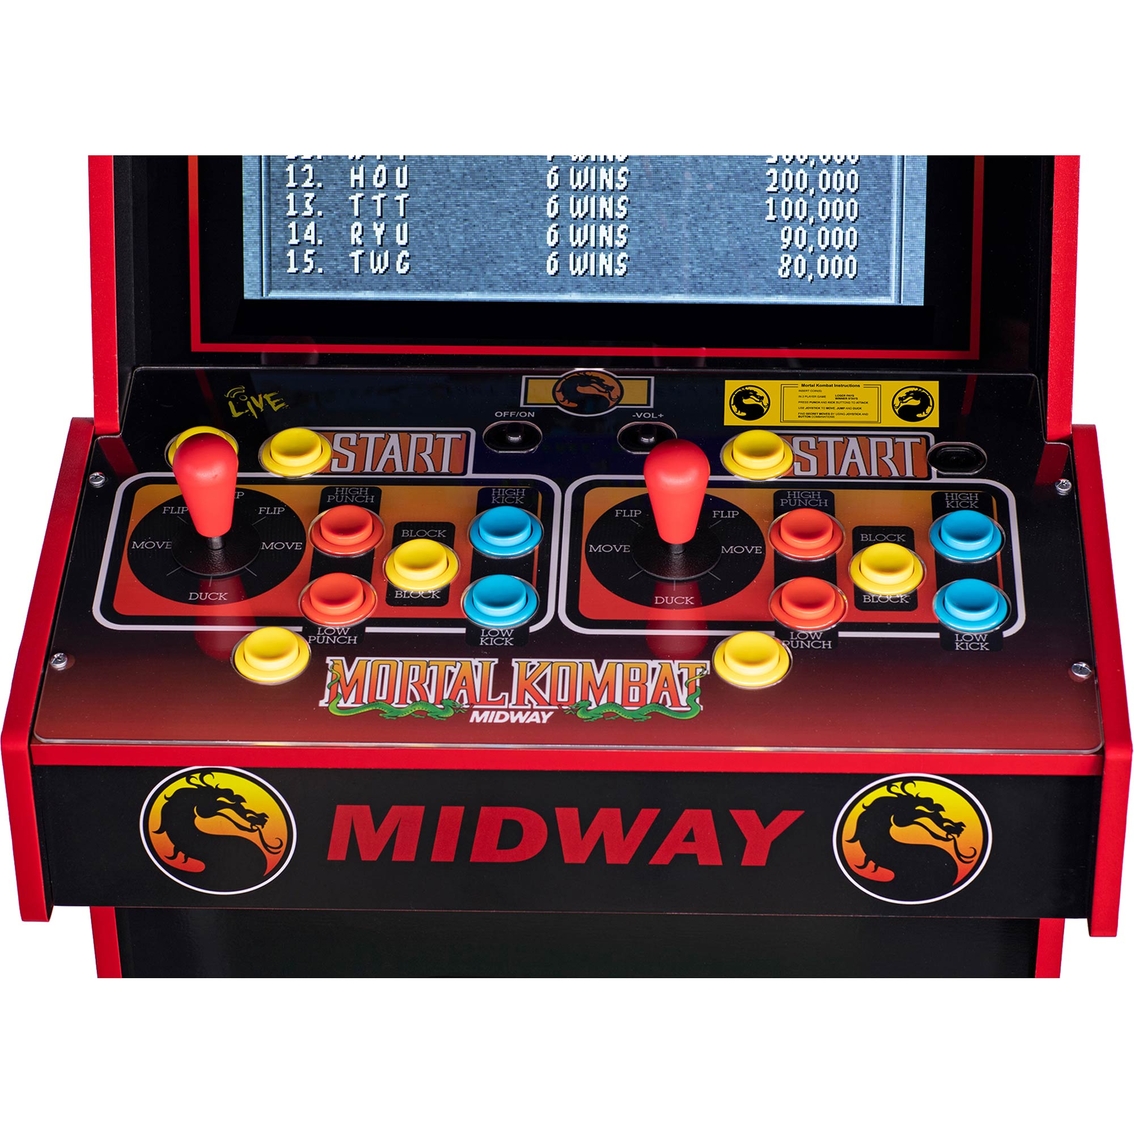 Arcade 1UP MK 30th Anniversary Edition Legacy - Image 3 of 8